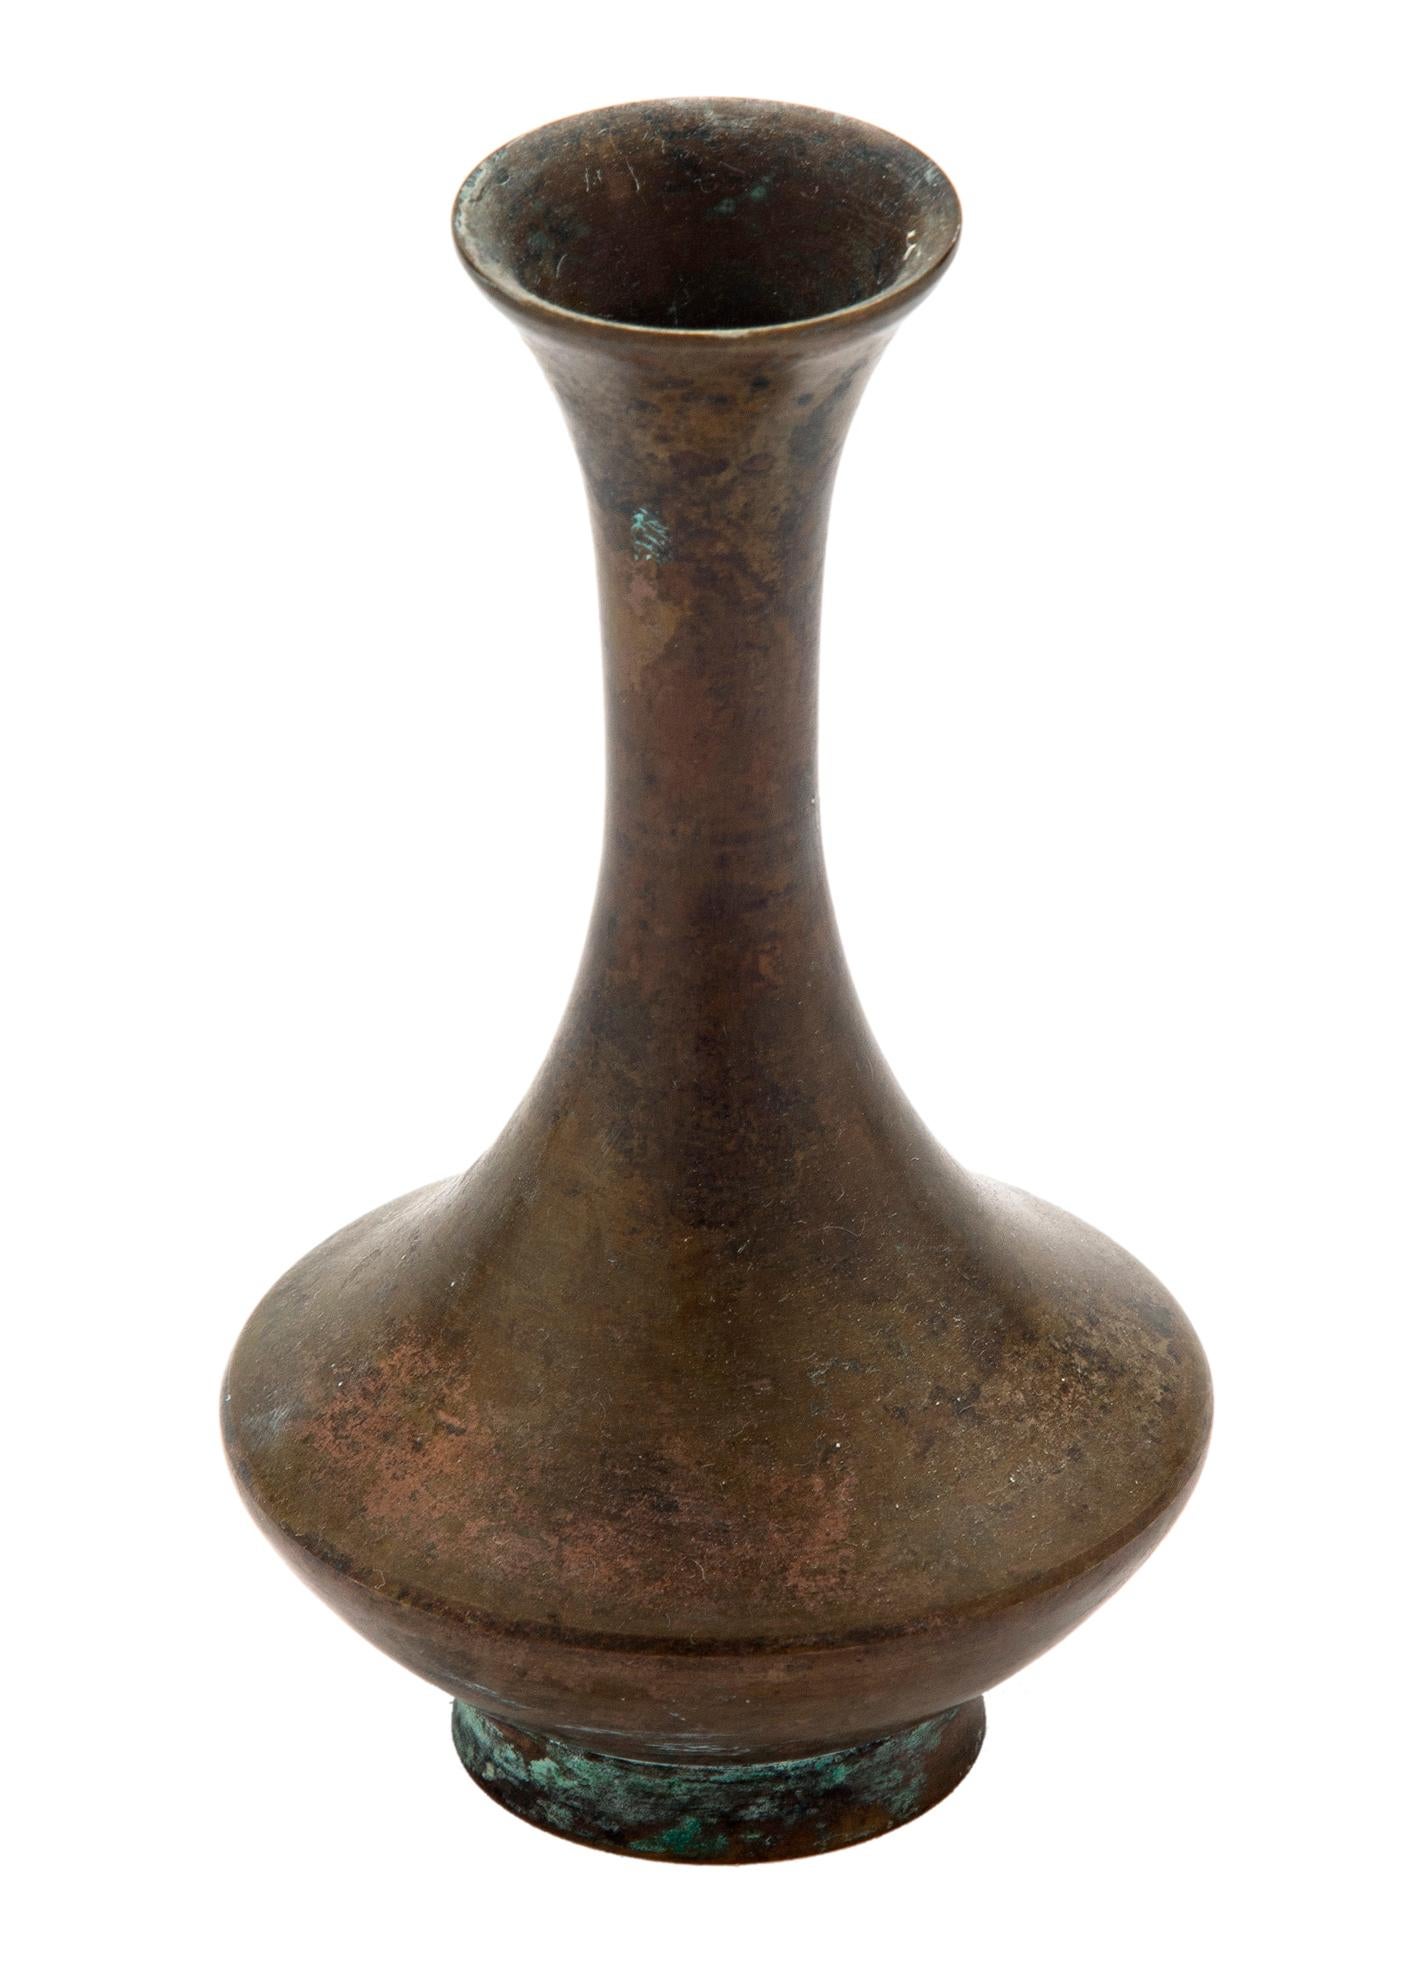 Mottled bronze bud vase having a rare & unique form with flared mouth & curvaceous profile.